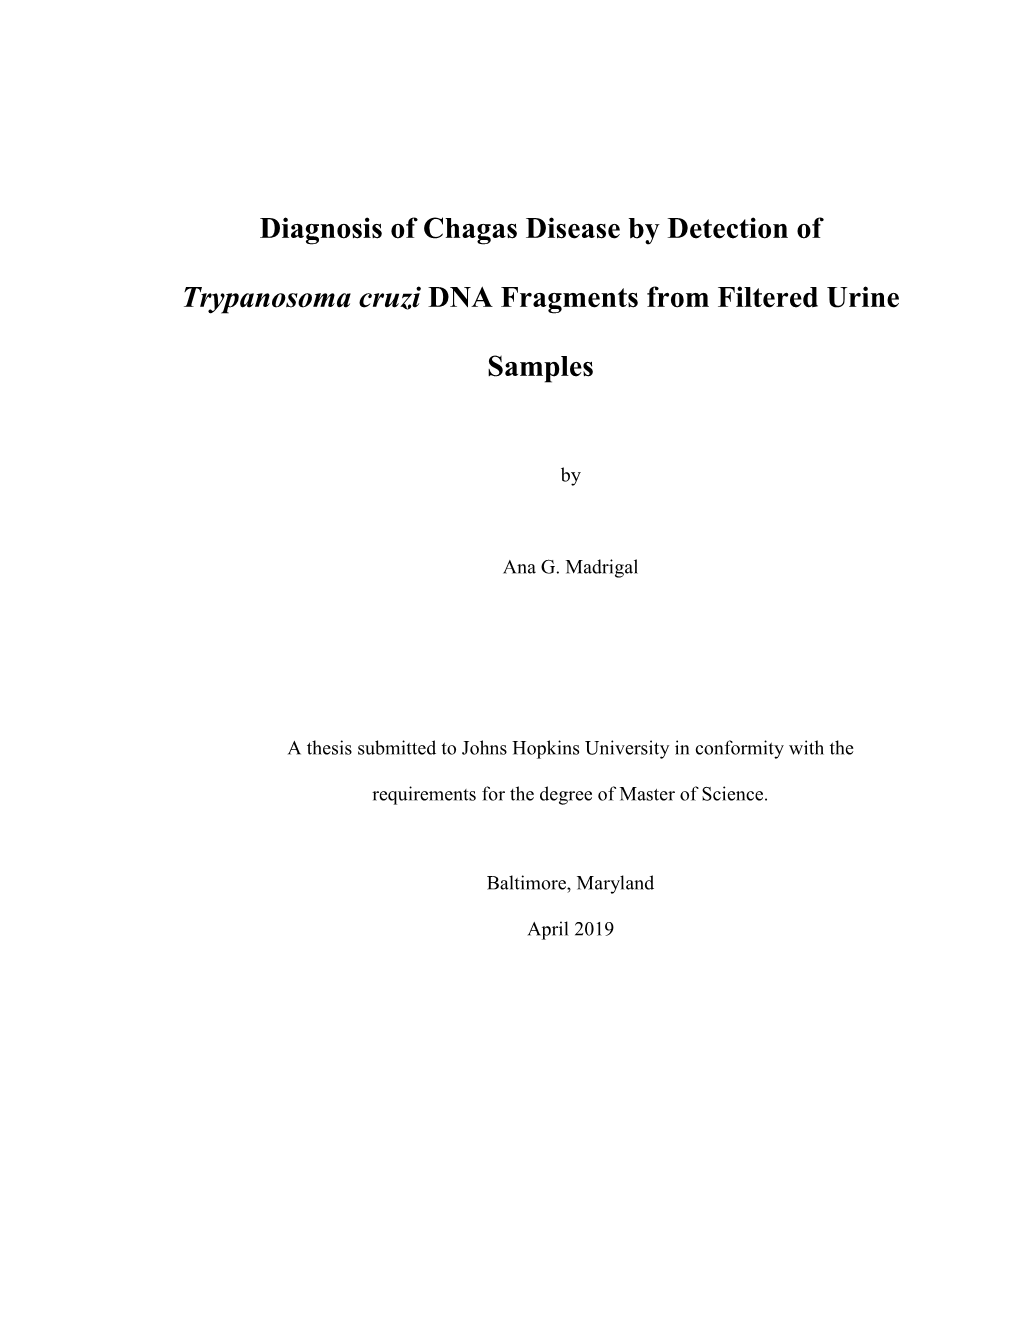 Diagnosis of Chagas Disease by Detection of Trypanosoma Cruzi